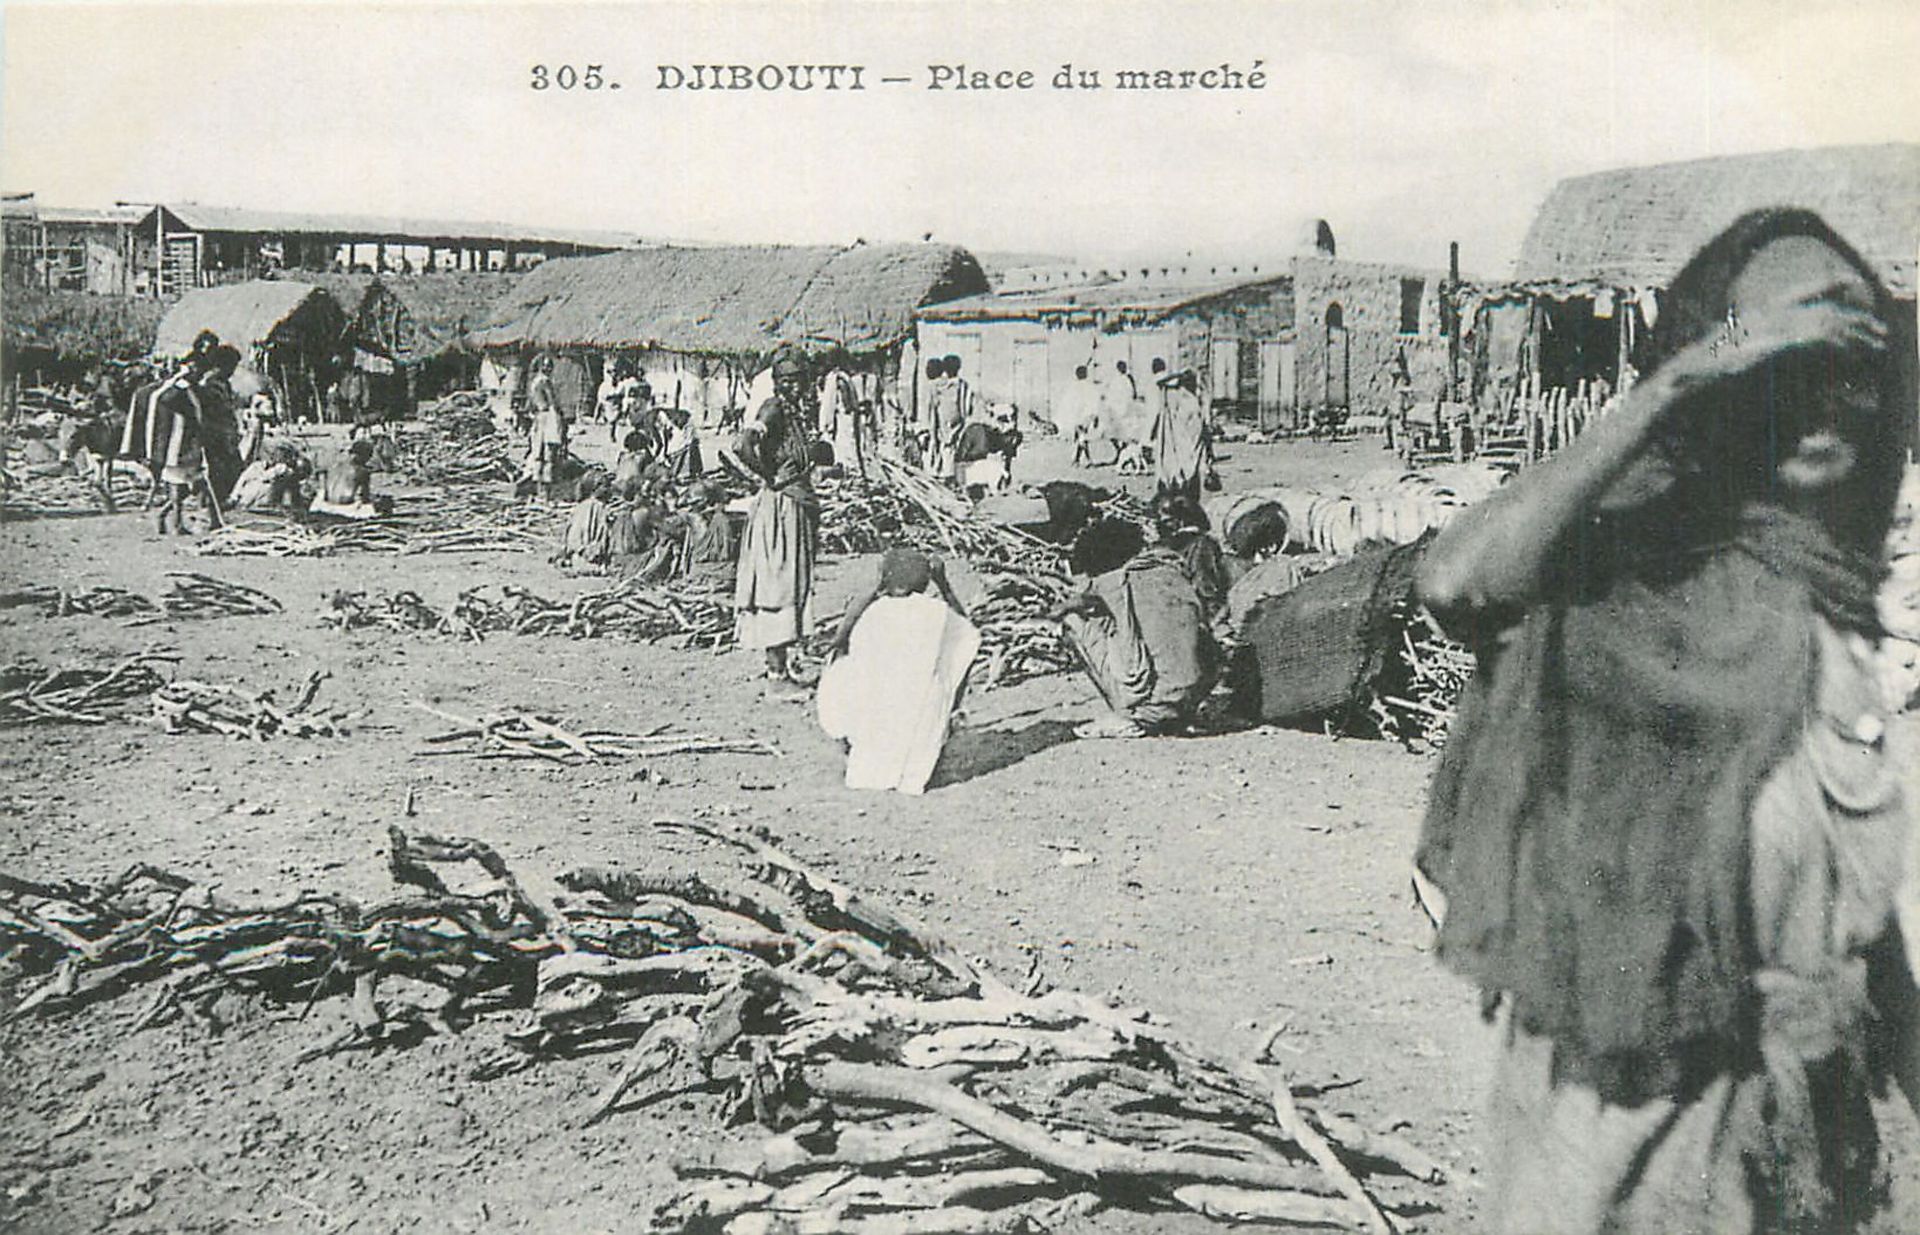 Null 16 POST CARDS BLACK AFRICA : Djibouti-3cpa and Senegal-13cpa. Postcards of &hellip;